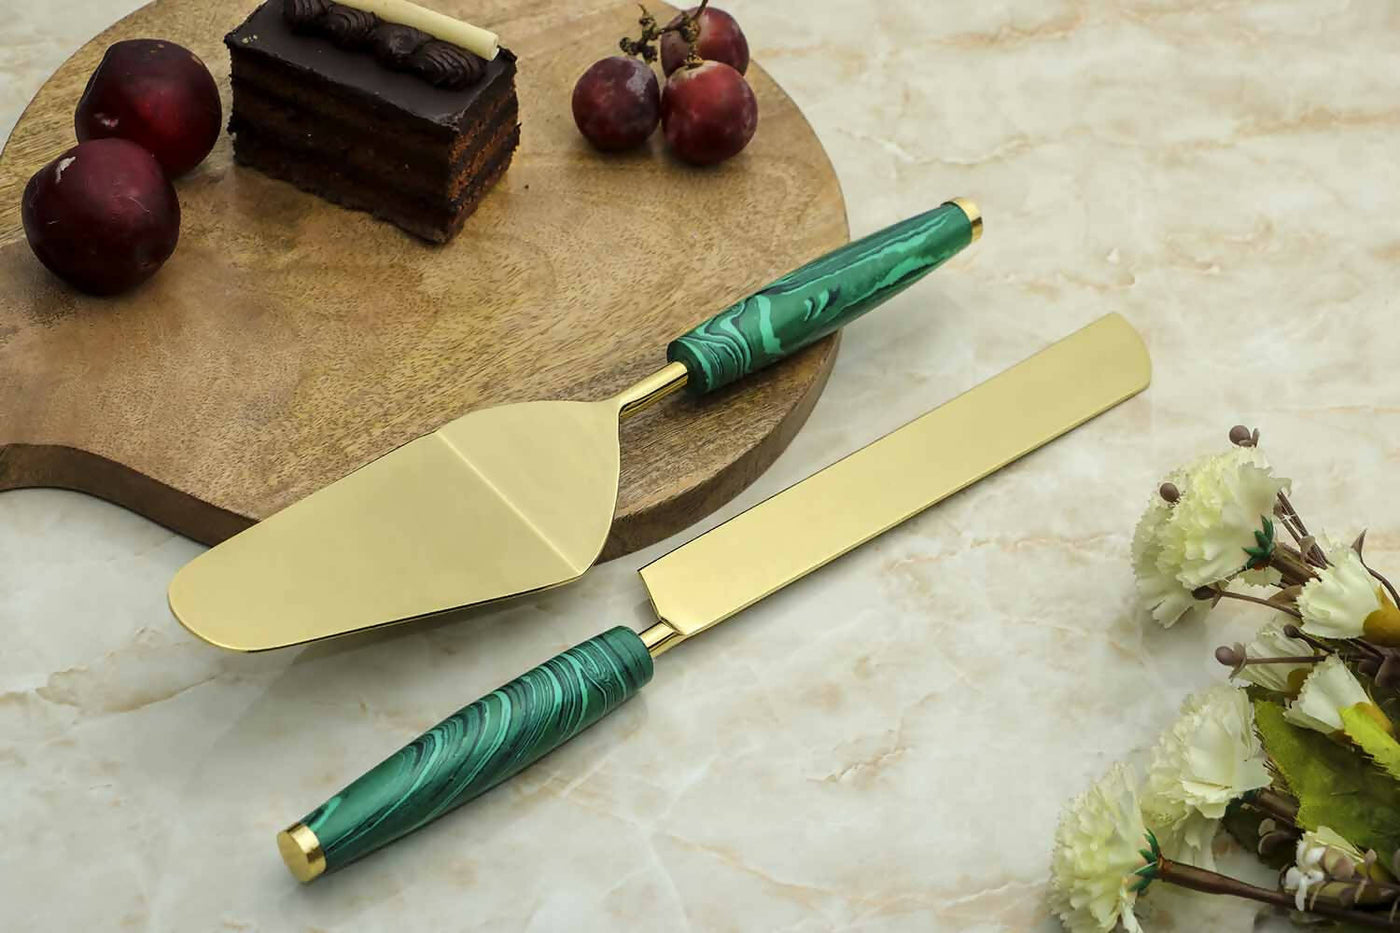 Green Stone Dust with Stainless Steel Cake Server - Set of 2 - Dining & Kitchen - 1